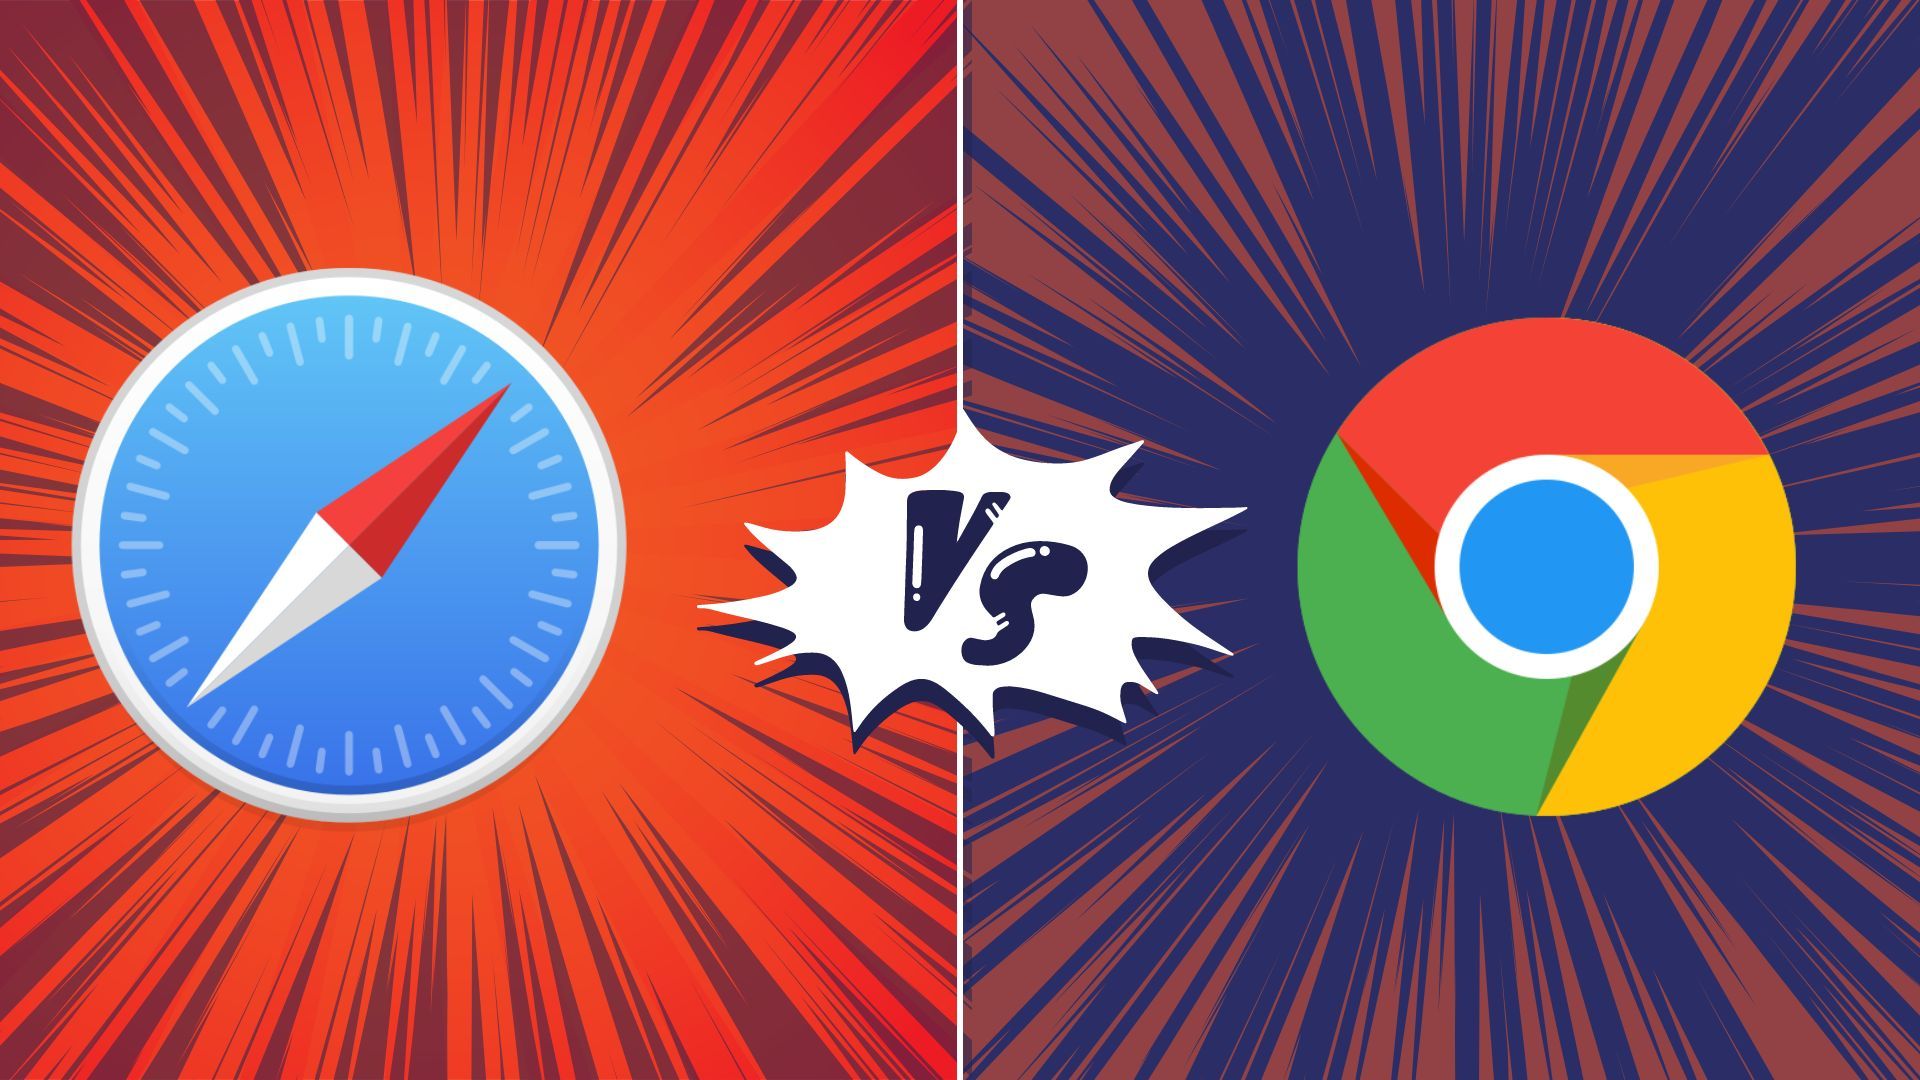 microsoft, android, google chrome vs. mozilla firefox: which desktop browser is better